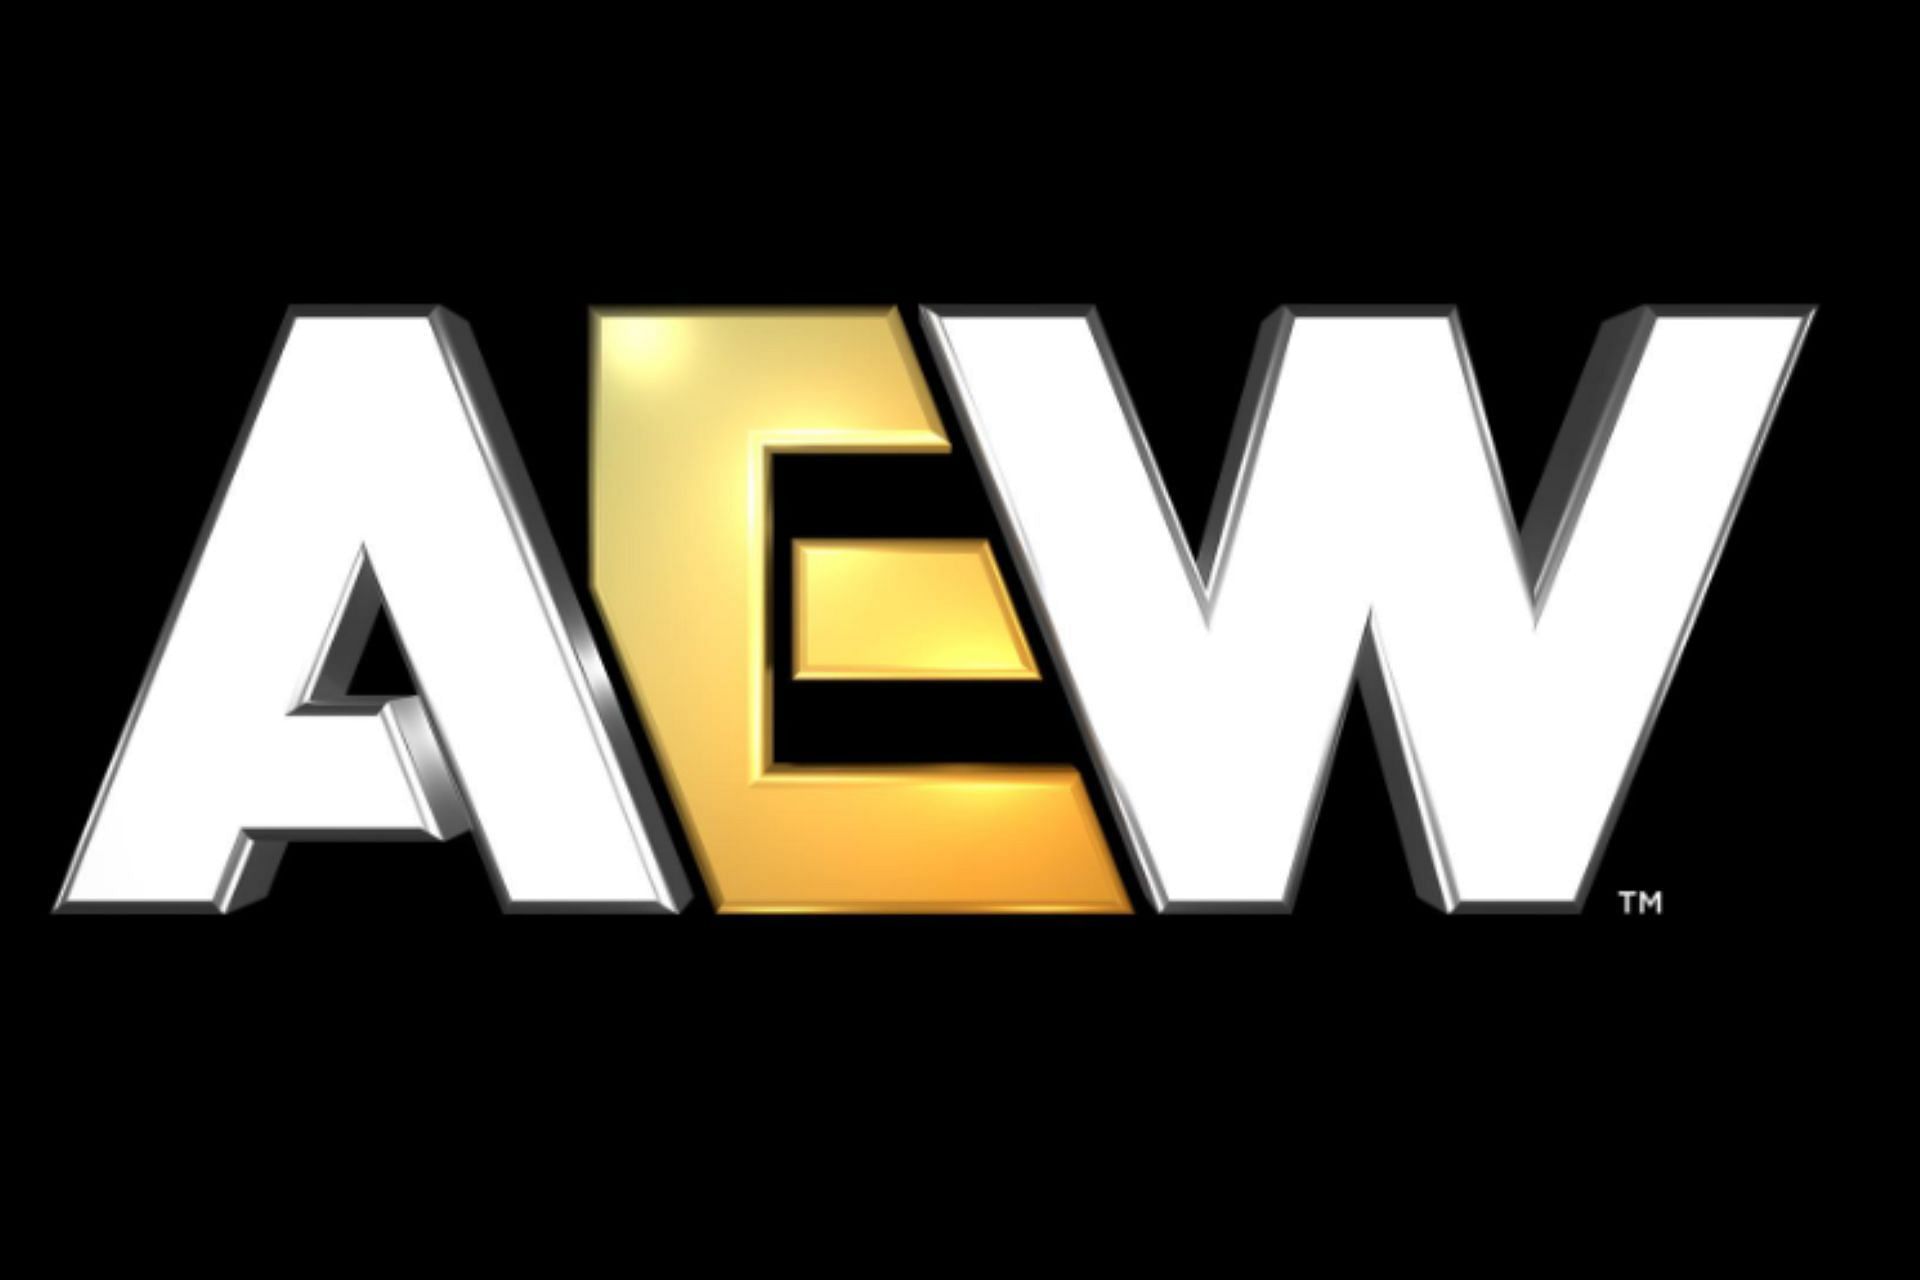 A major AEW name who botched a match could return anytime now [Image Source: AEW Facebook]